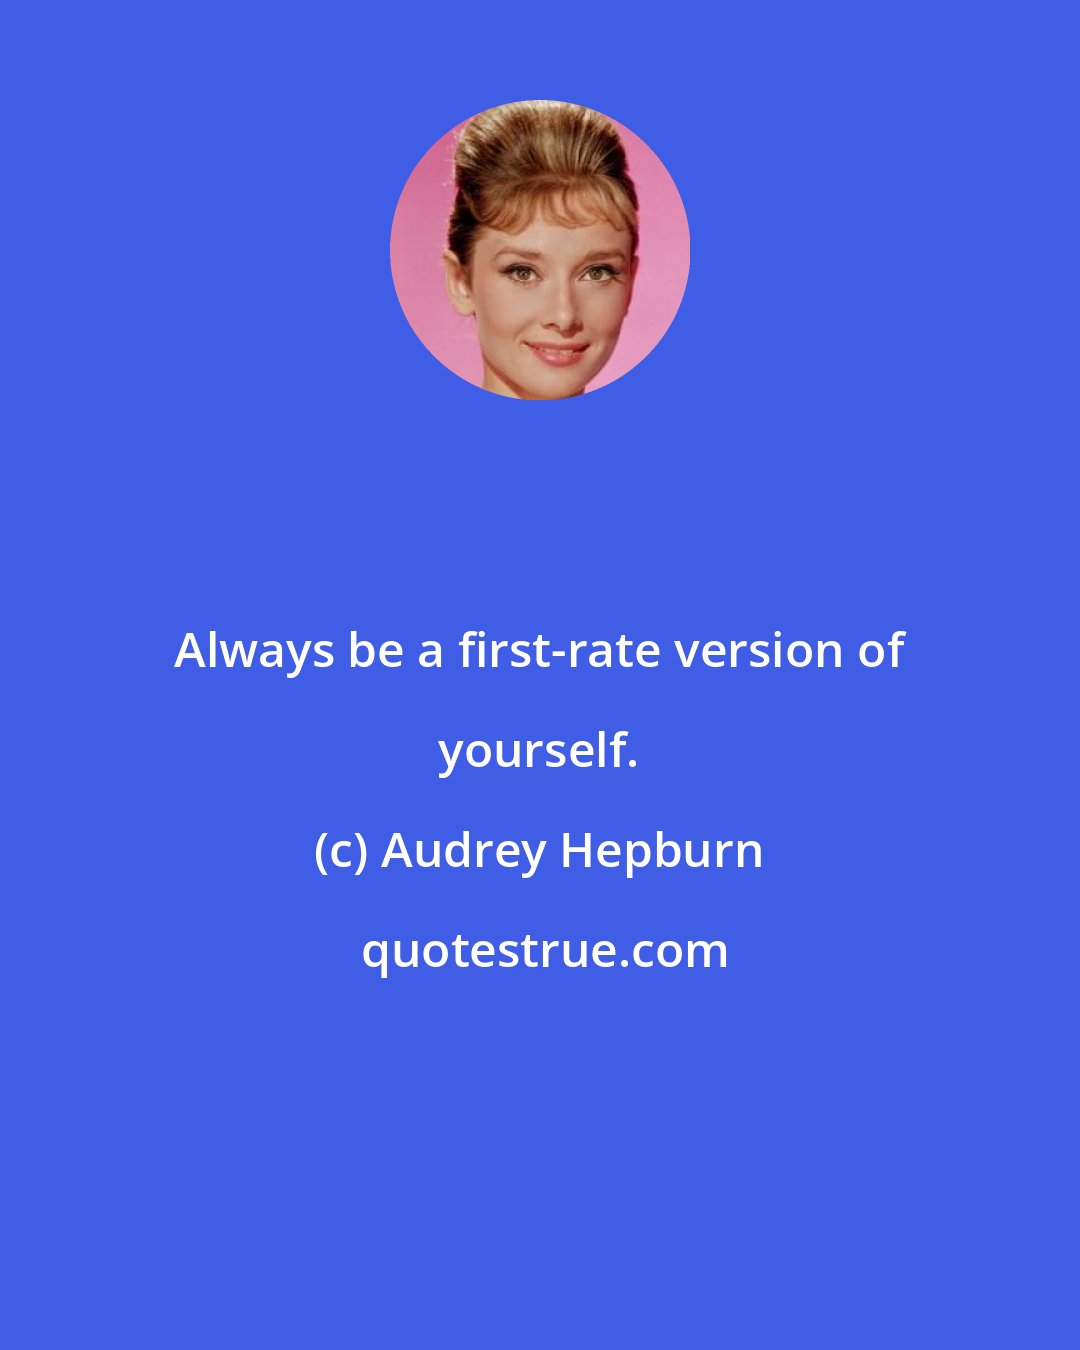 Audrey Hepburn: Always be a first-rate version of yourself.